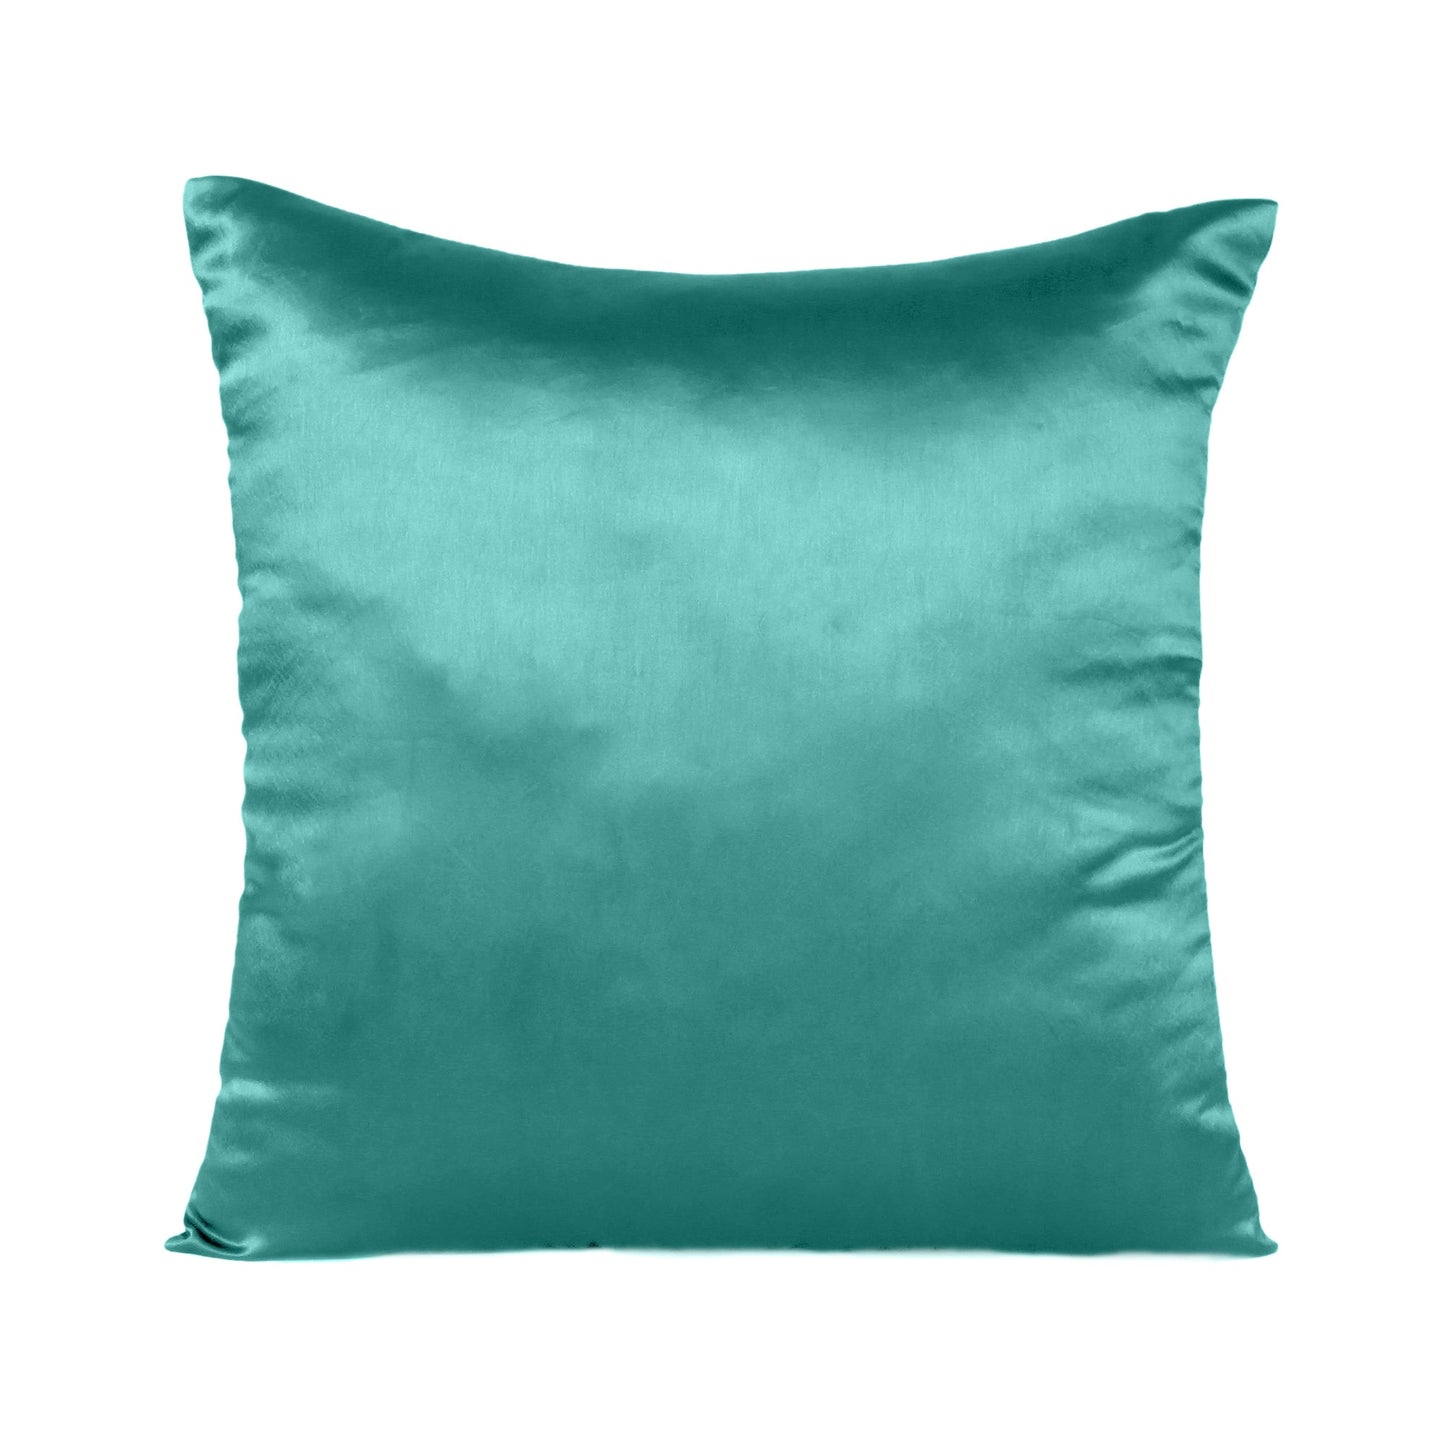 Teal Satin Silky Cushion Covers in Set of 2